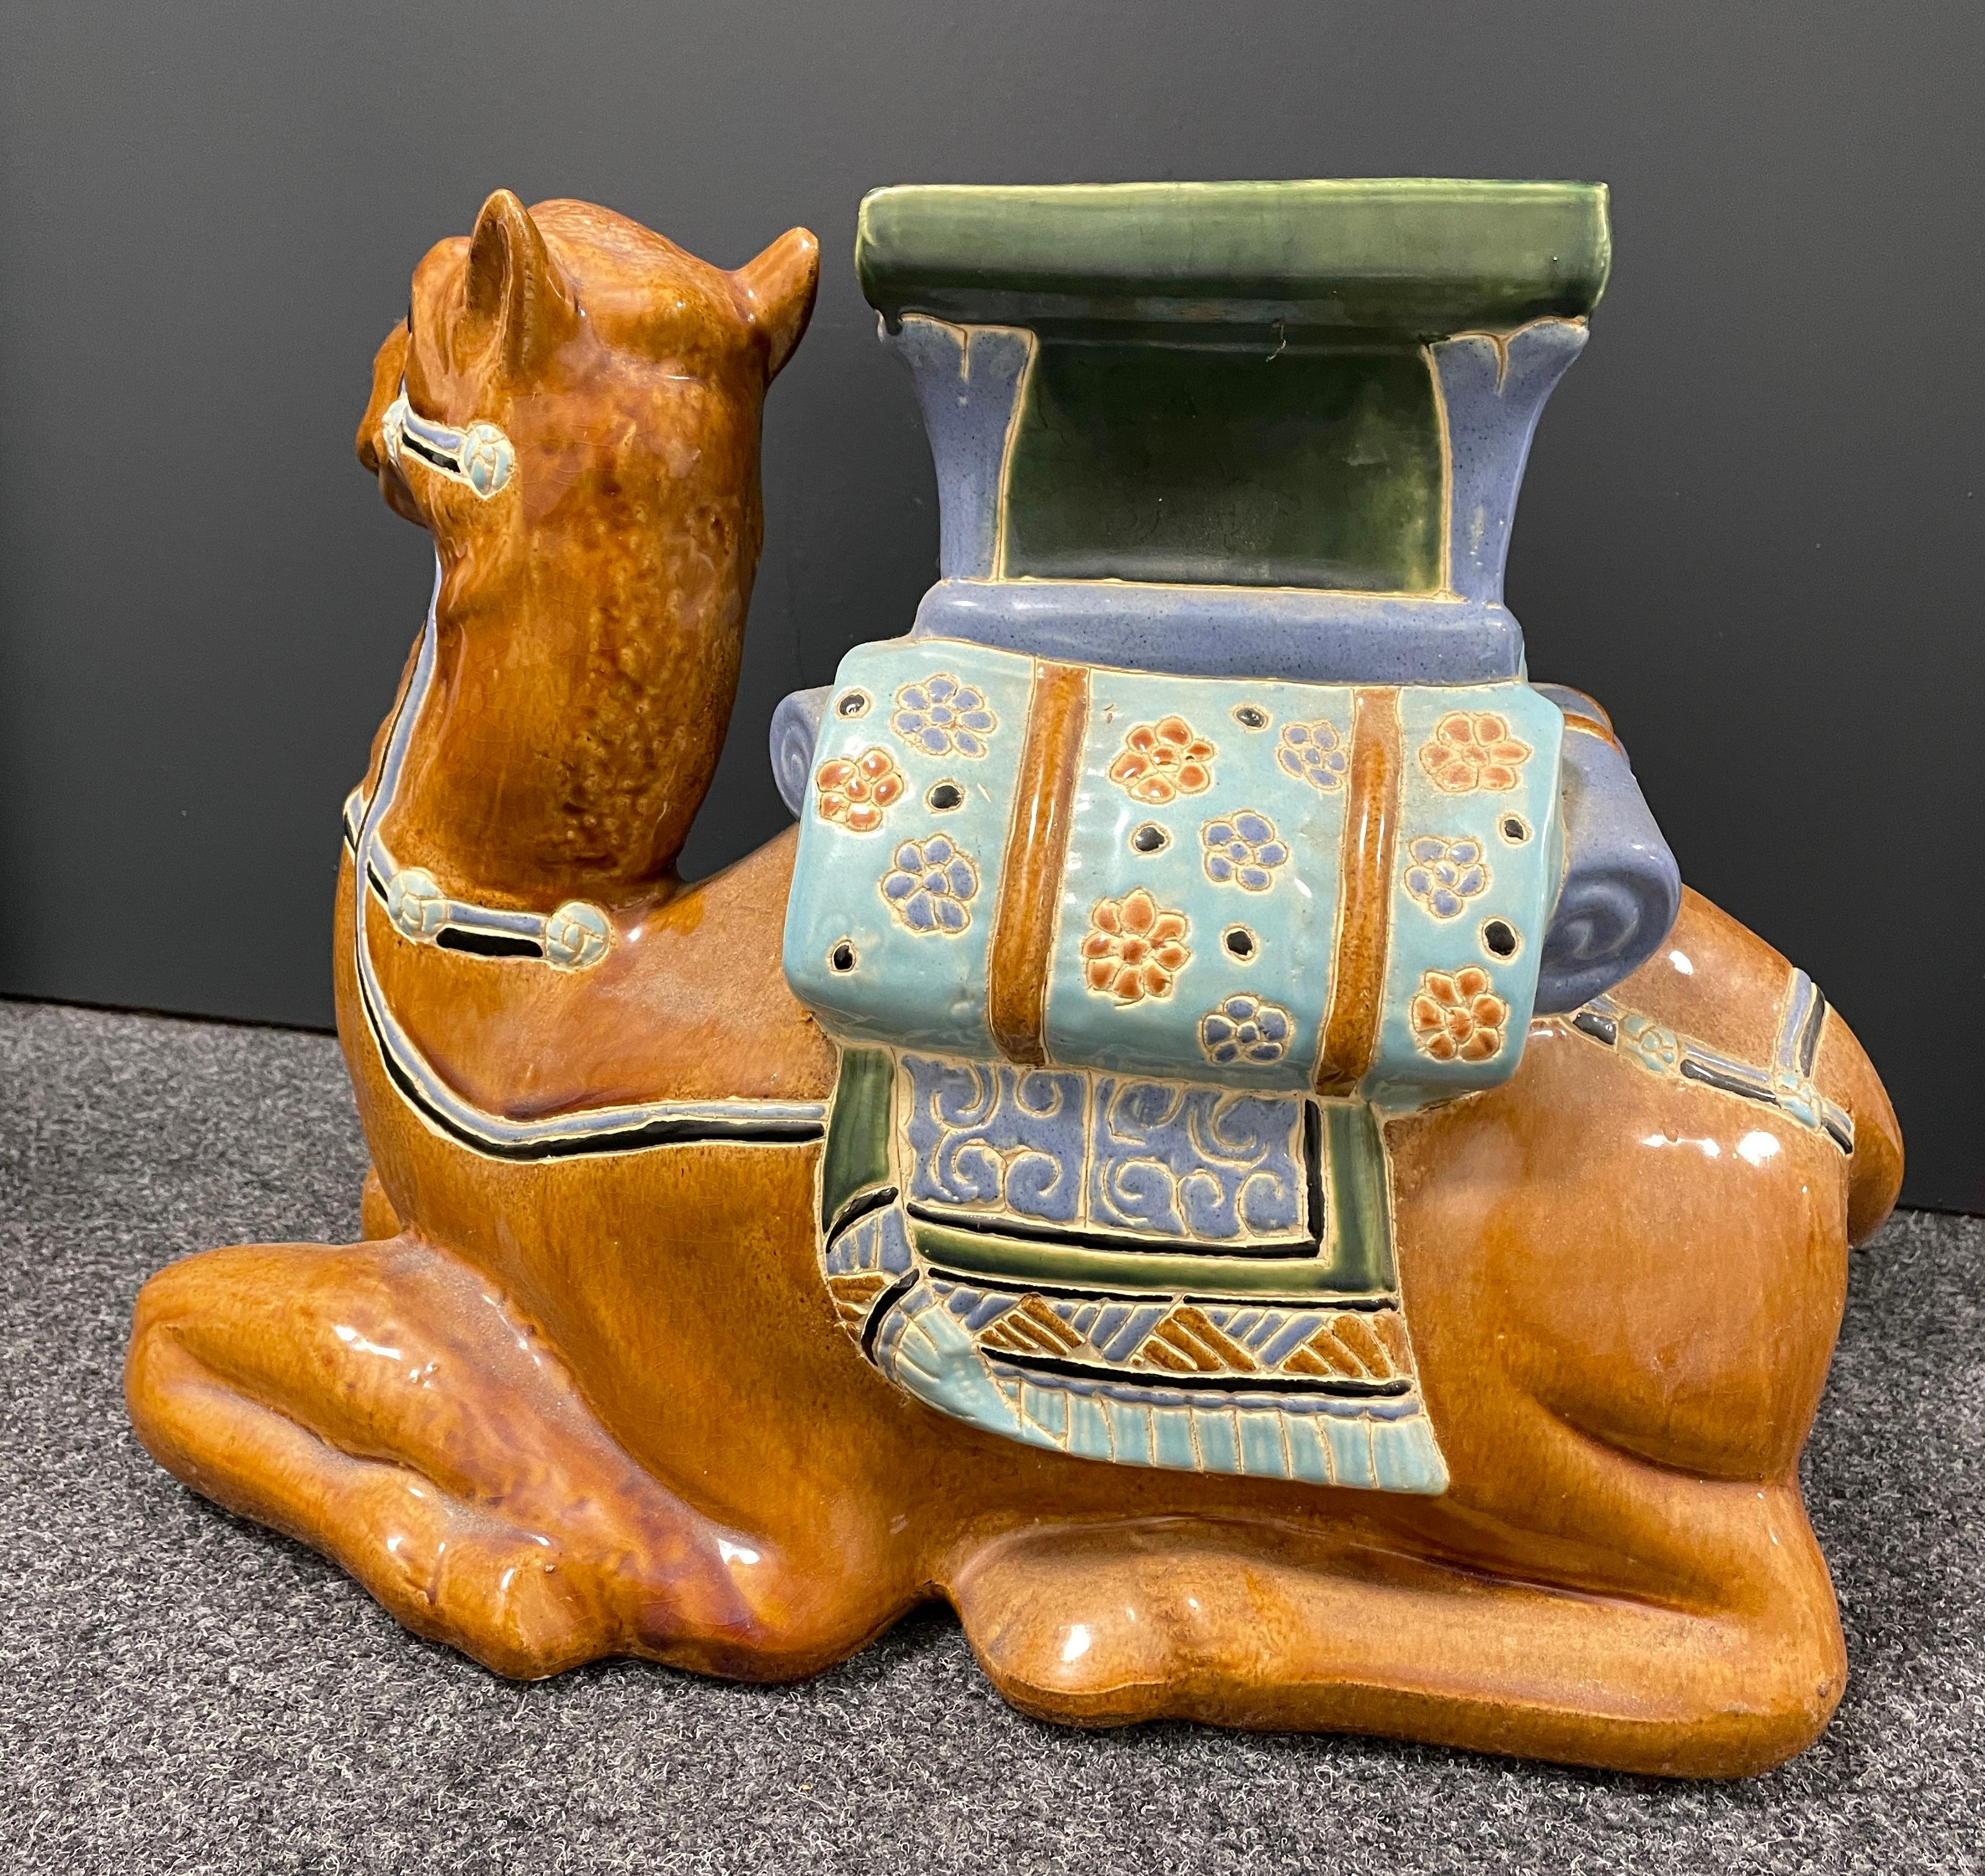 Mid-20th century glazed ceramic camel garden stool, flower pot seat, Pool Decoration or side table. Handcrafted ceramic. Nice addition to your home, patio or garden area.
   